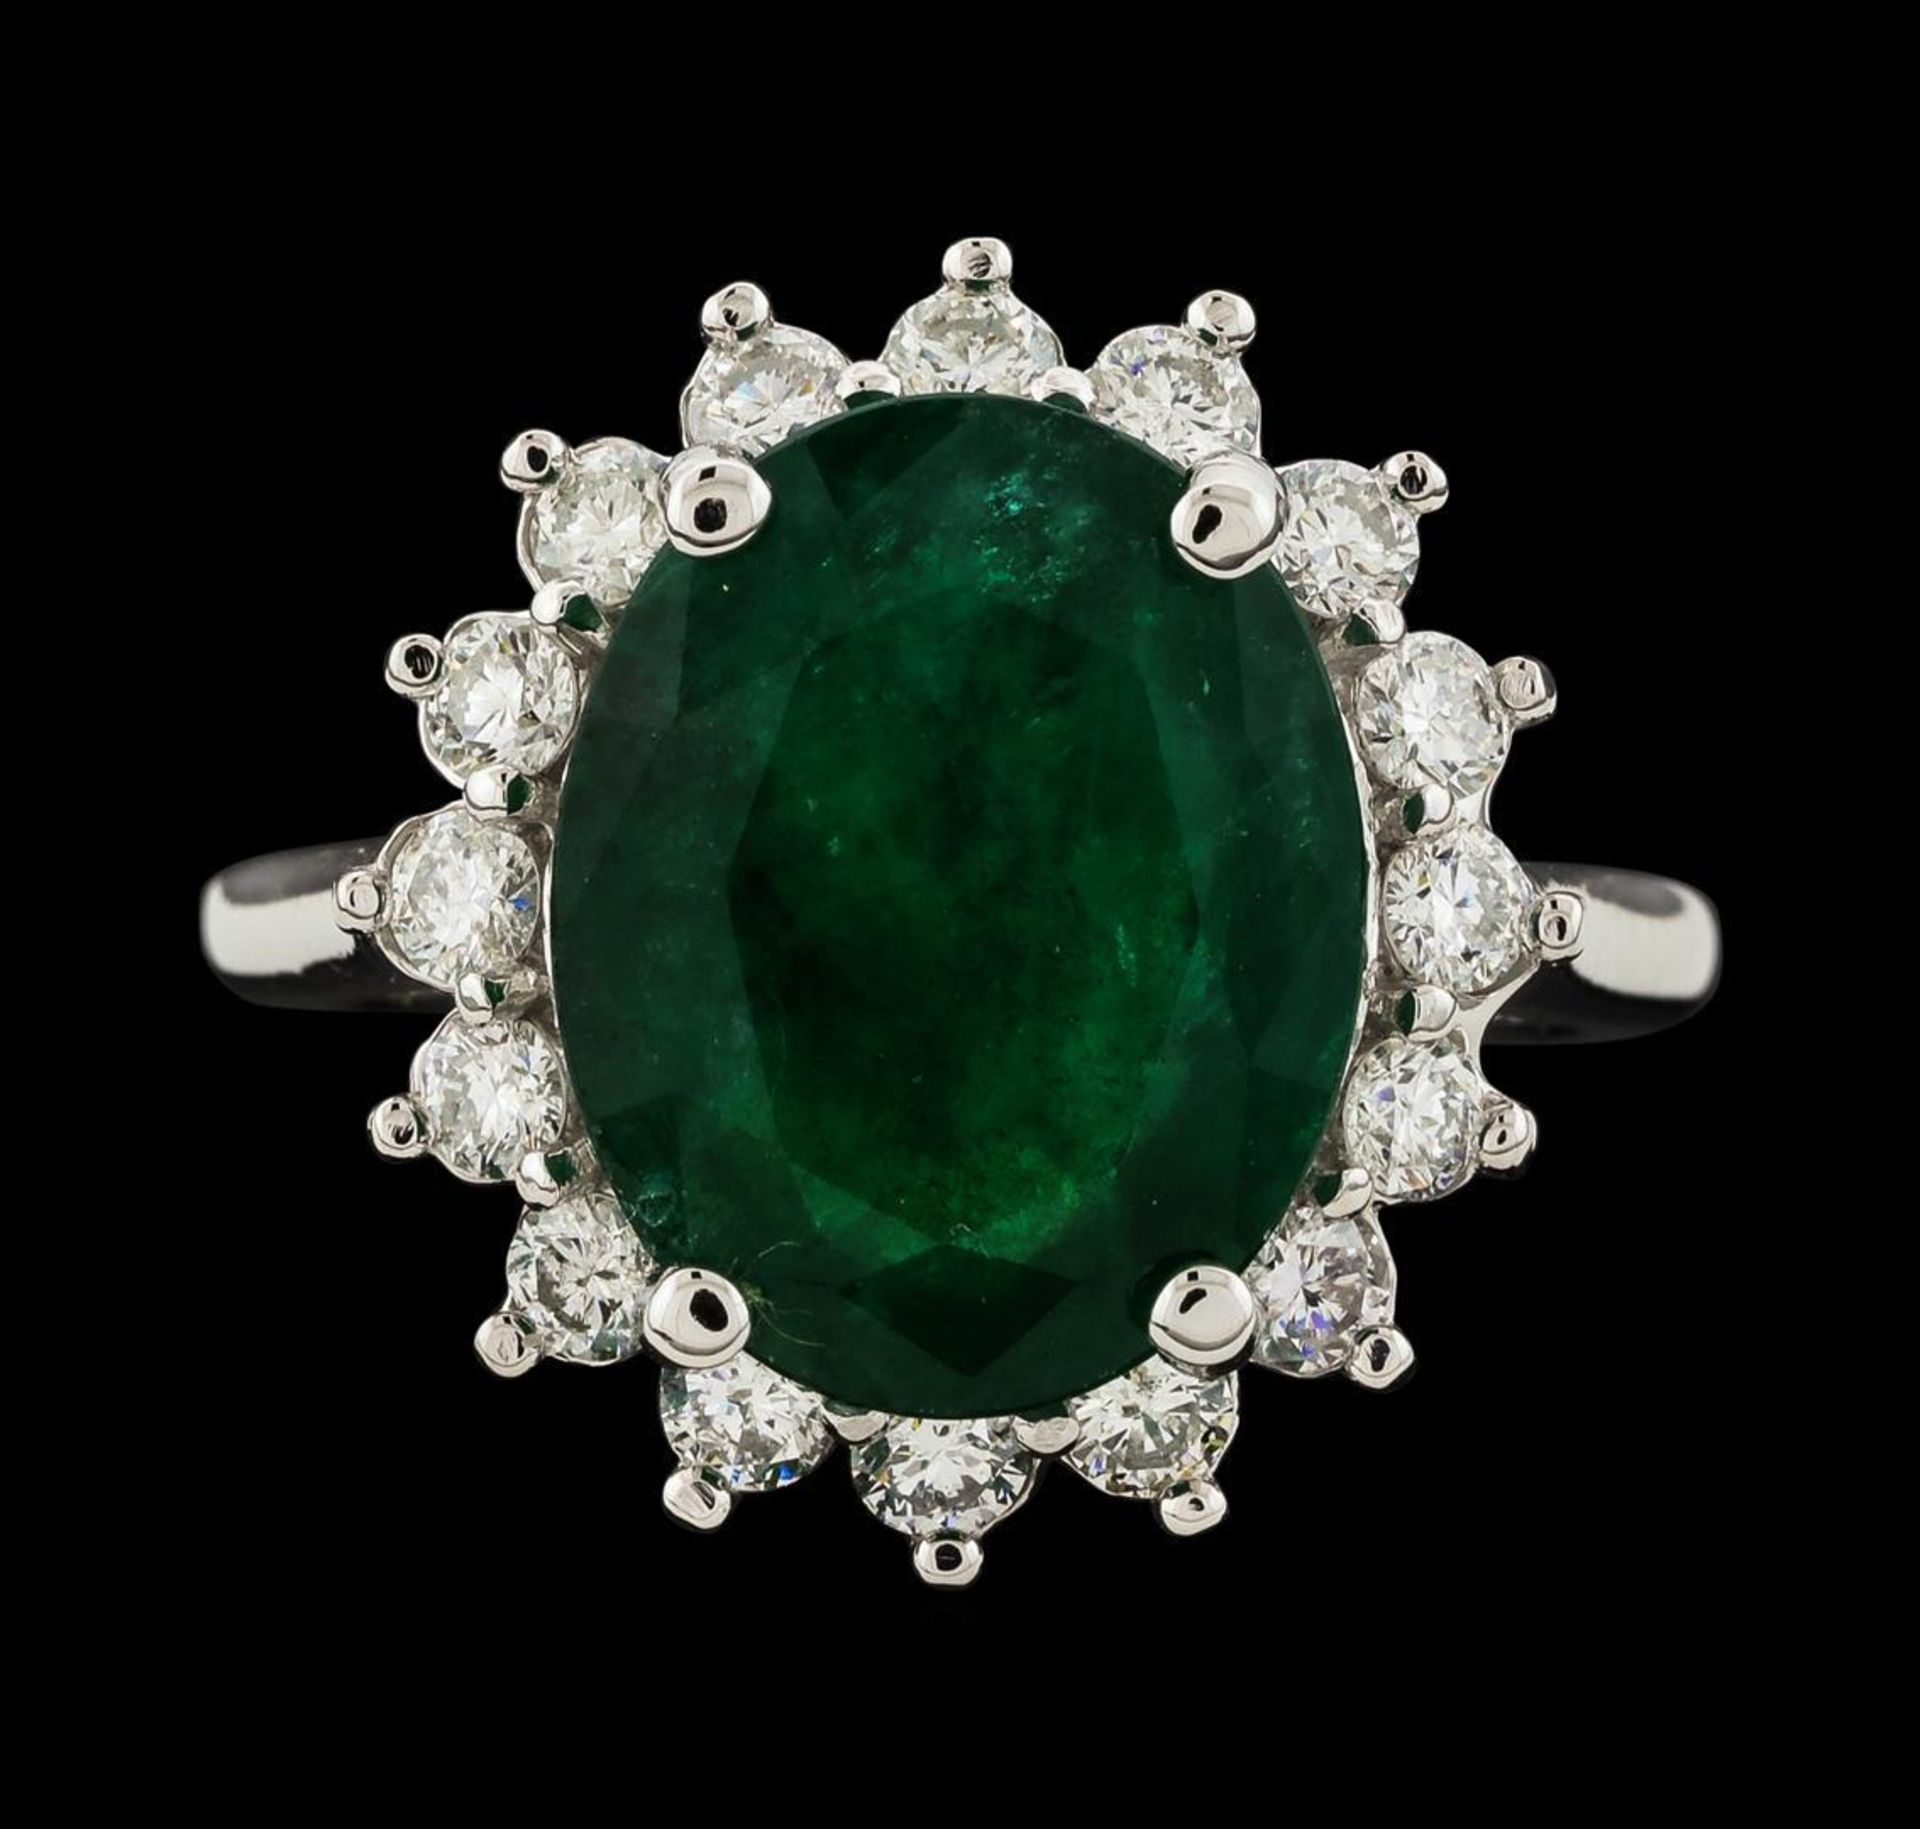 5.55 ctw Emerald and Diamond Ring - 14KT White Gold - Image 2 of 5